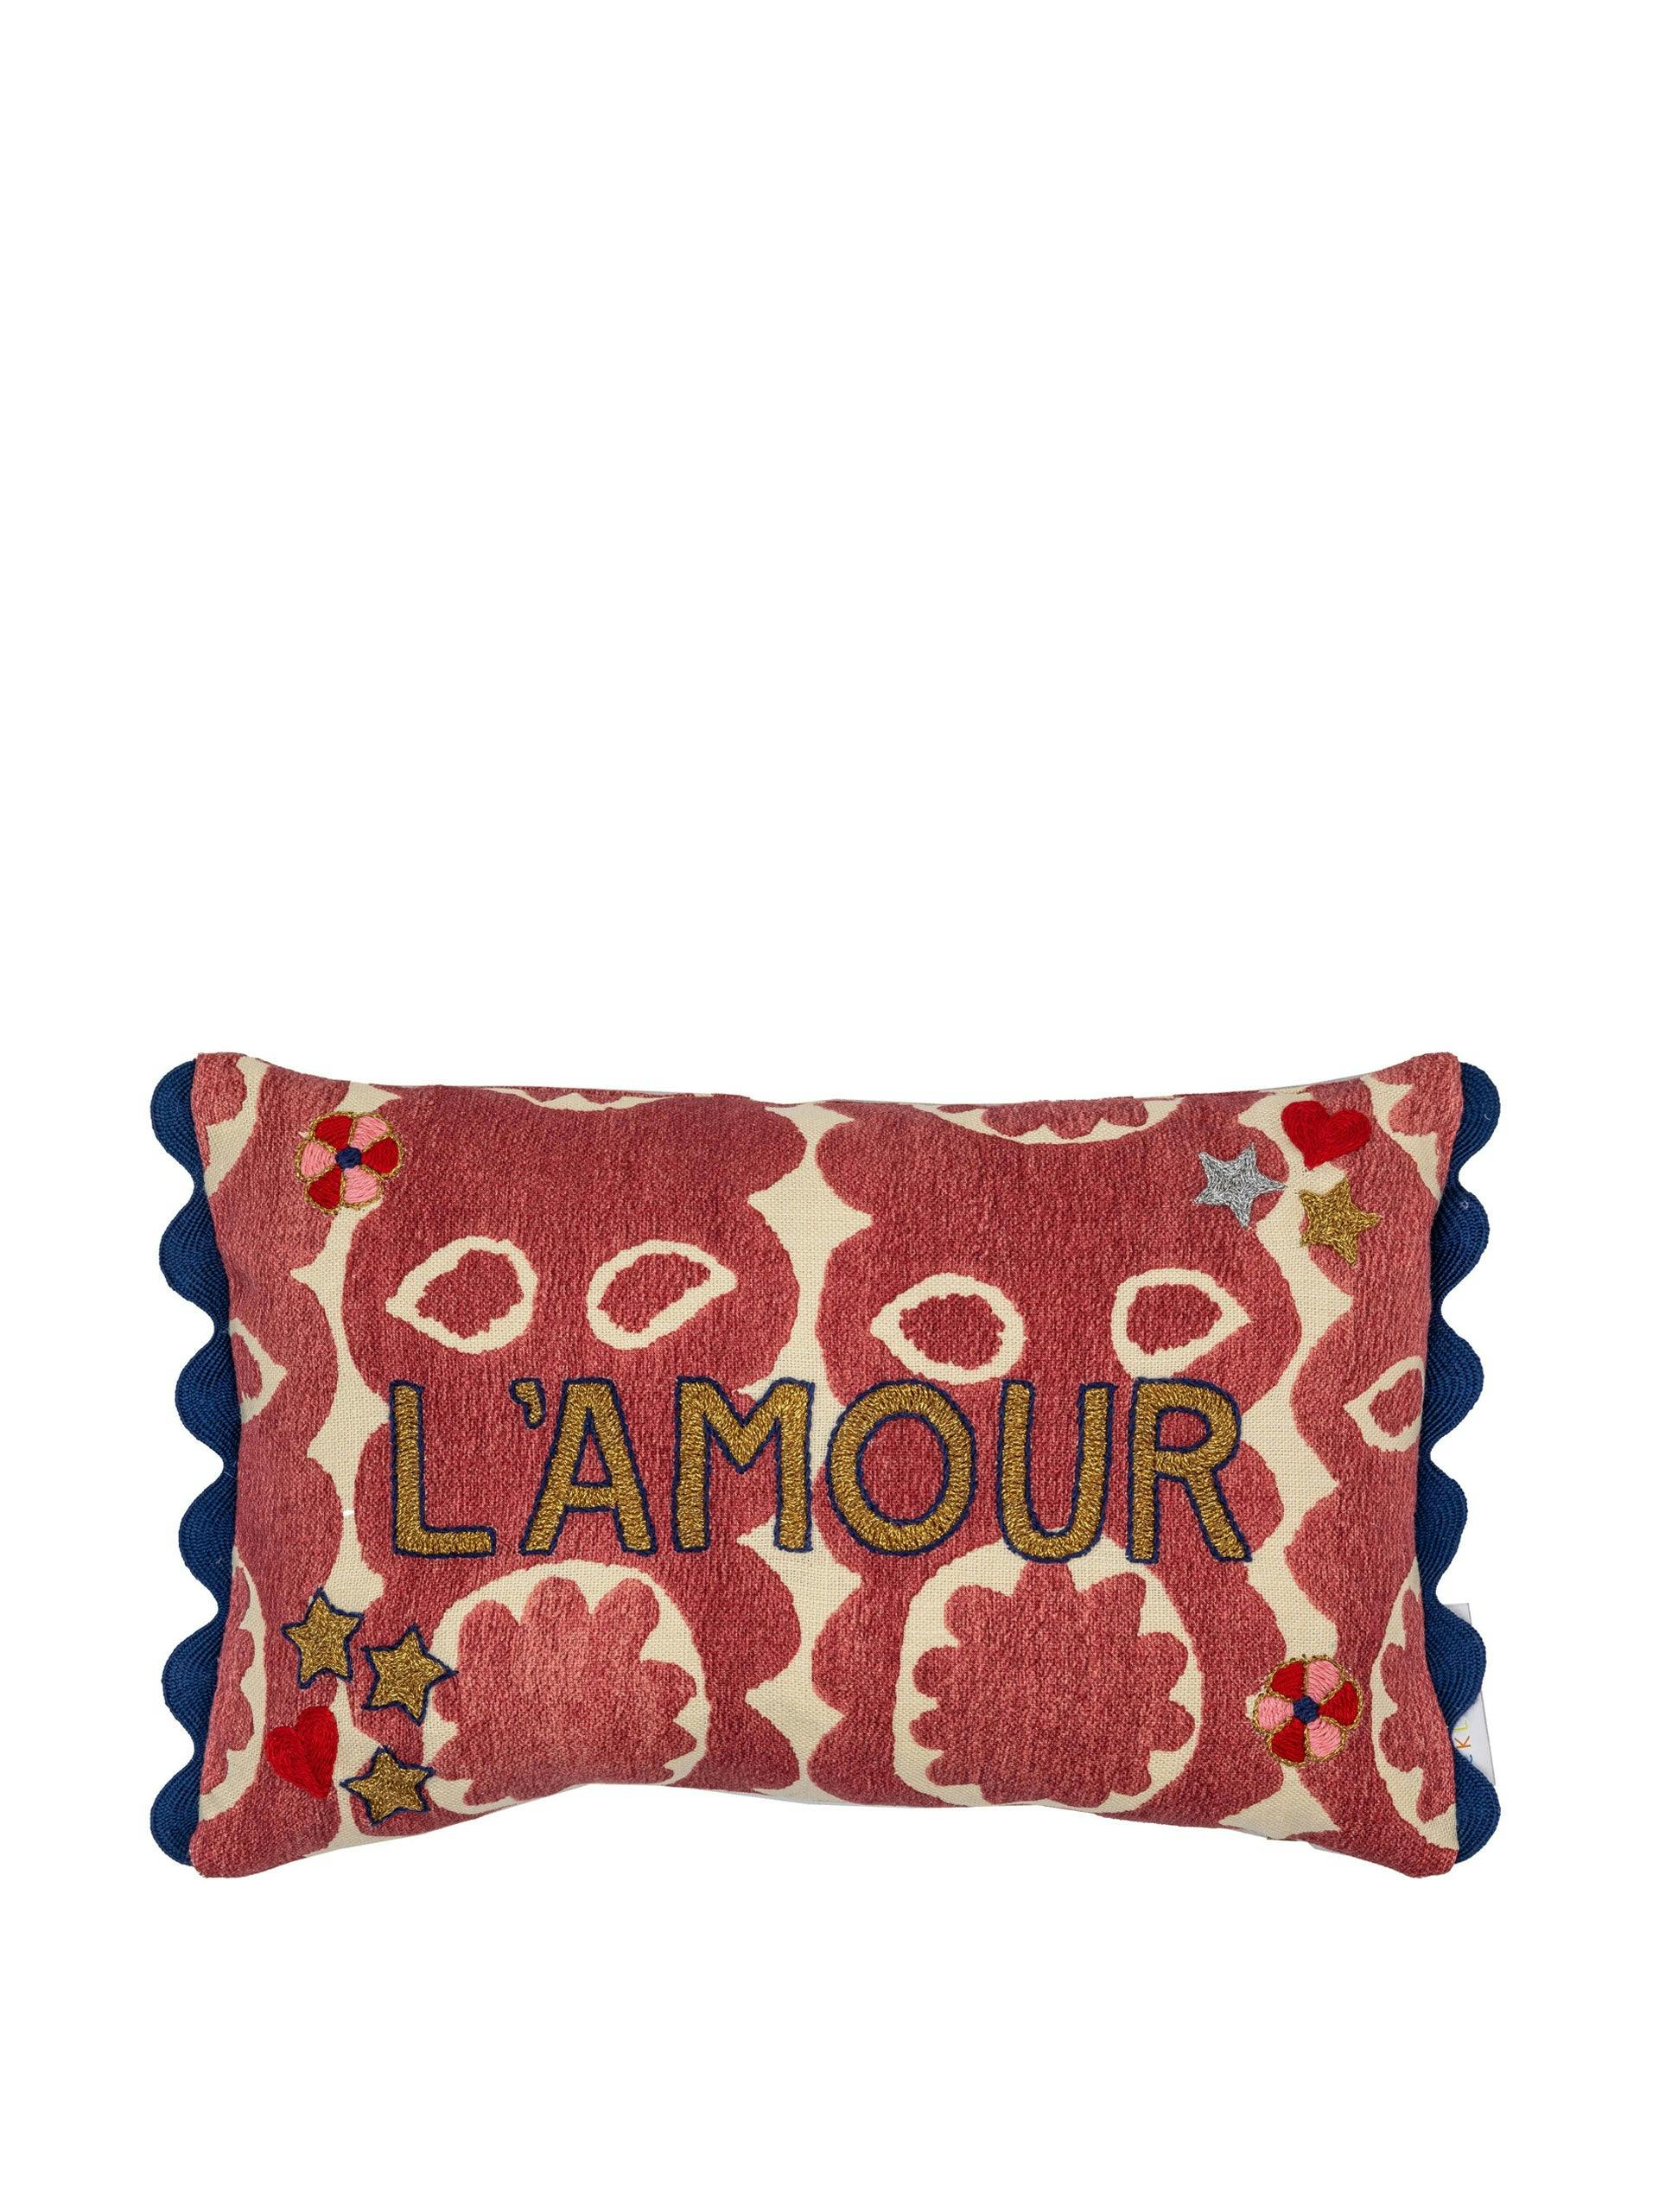 Red star l'amour oblong cushion